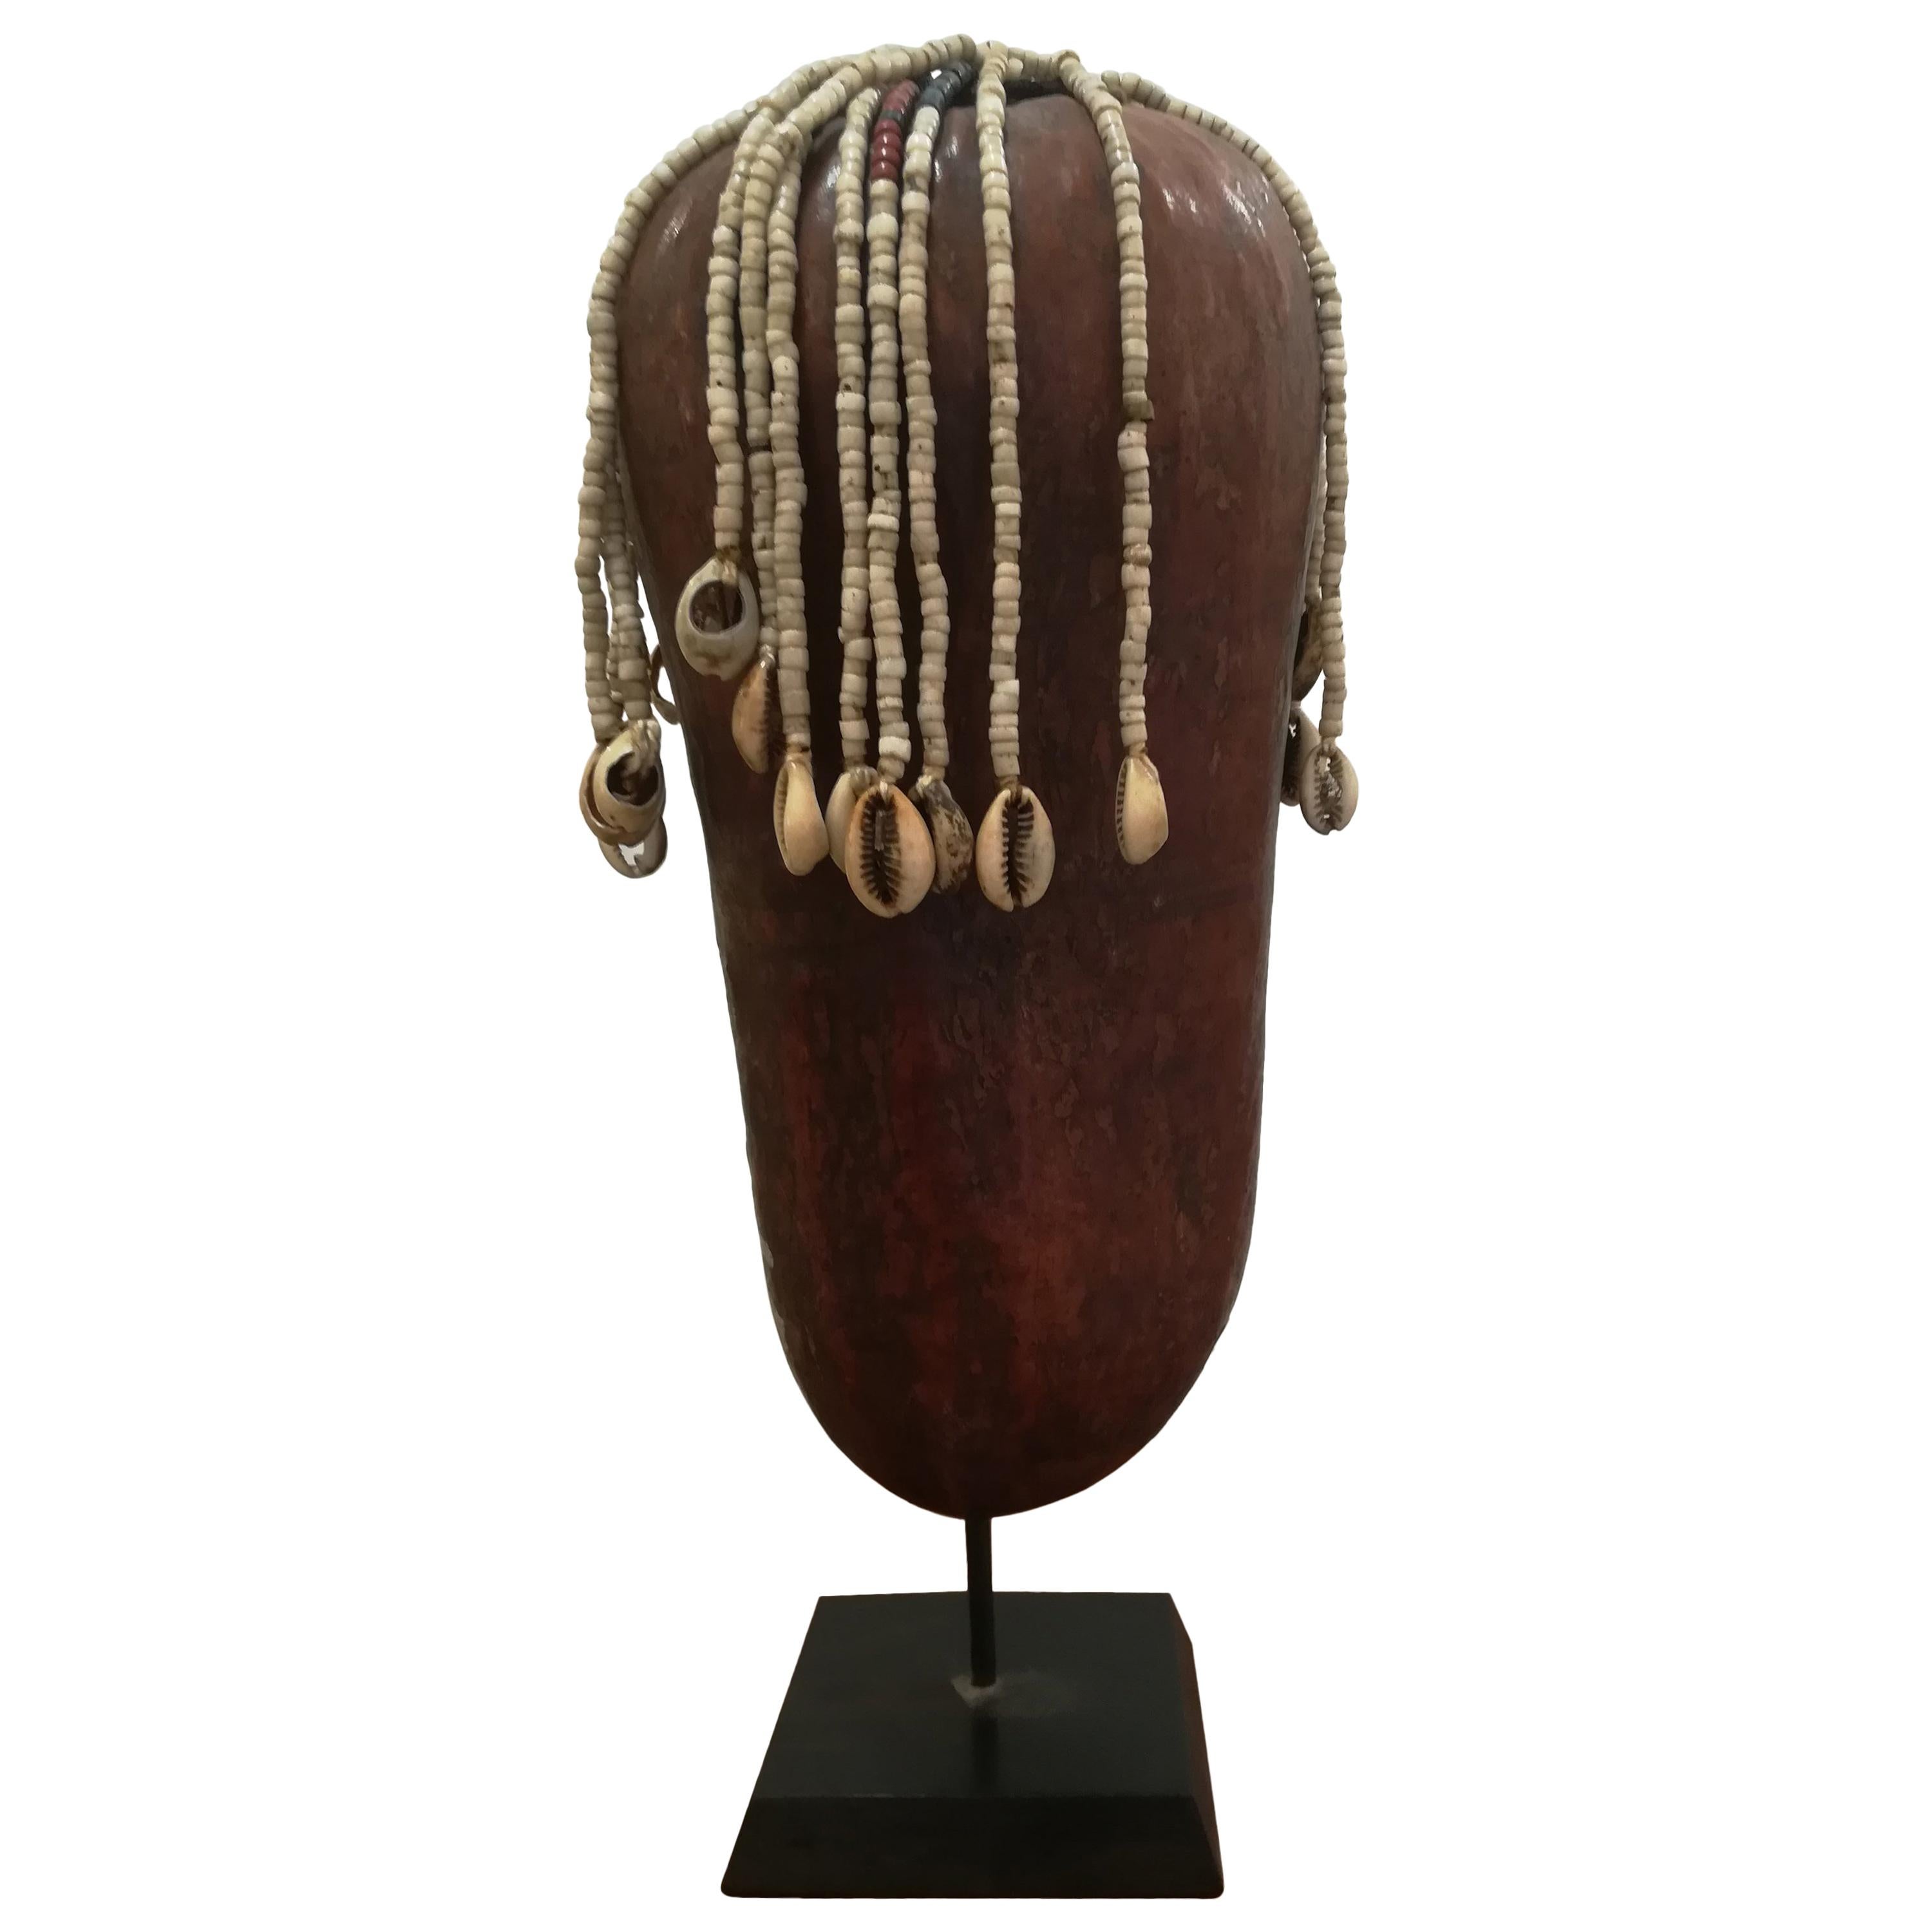 Fali Doll and Percussion Instrument Tanzania with Provenance